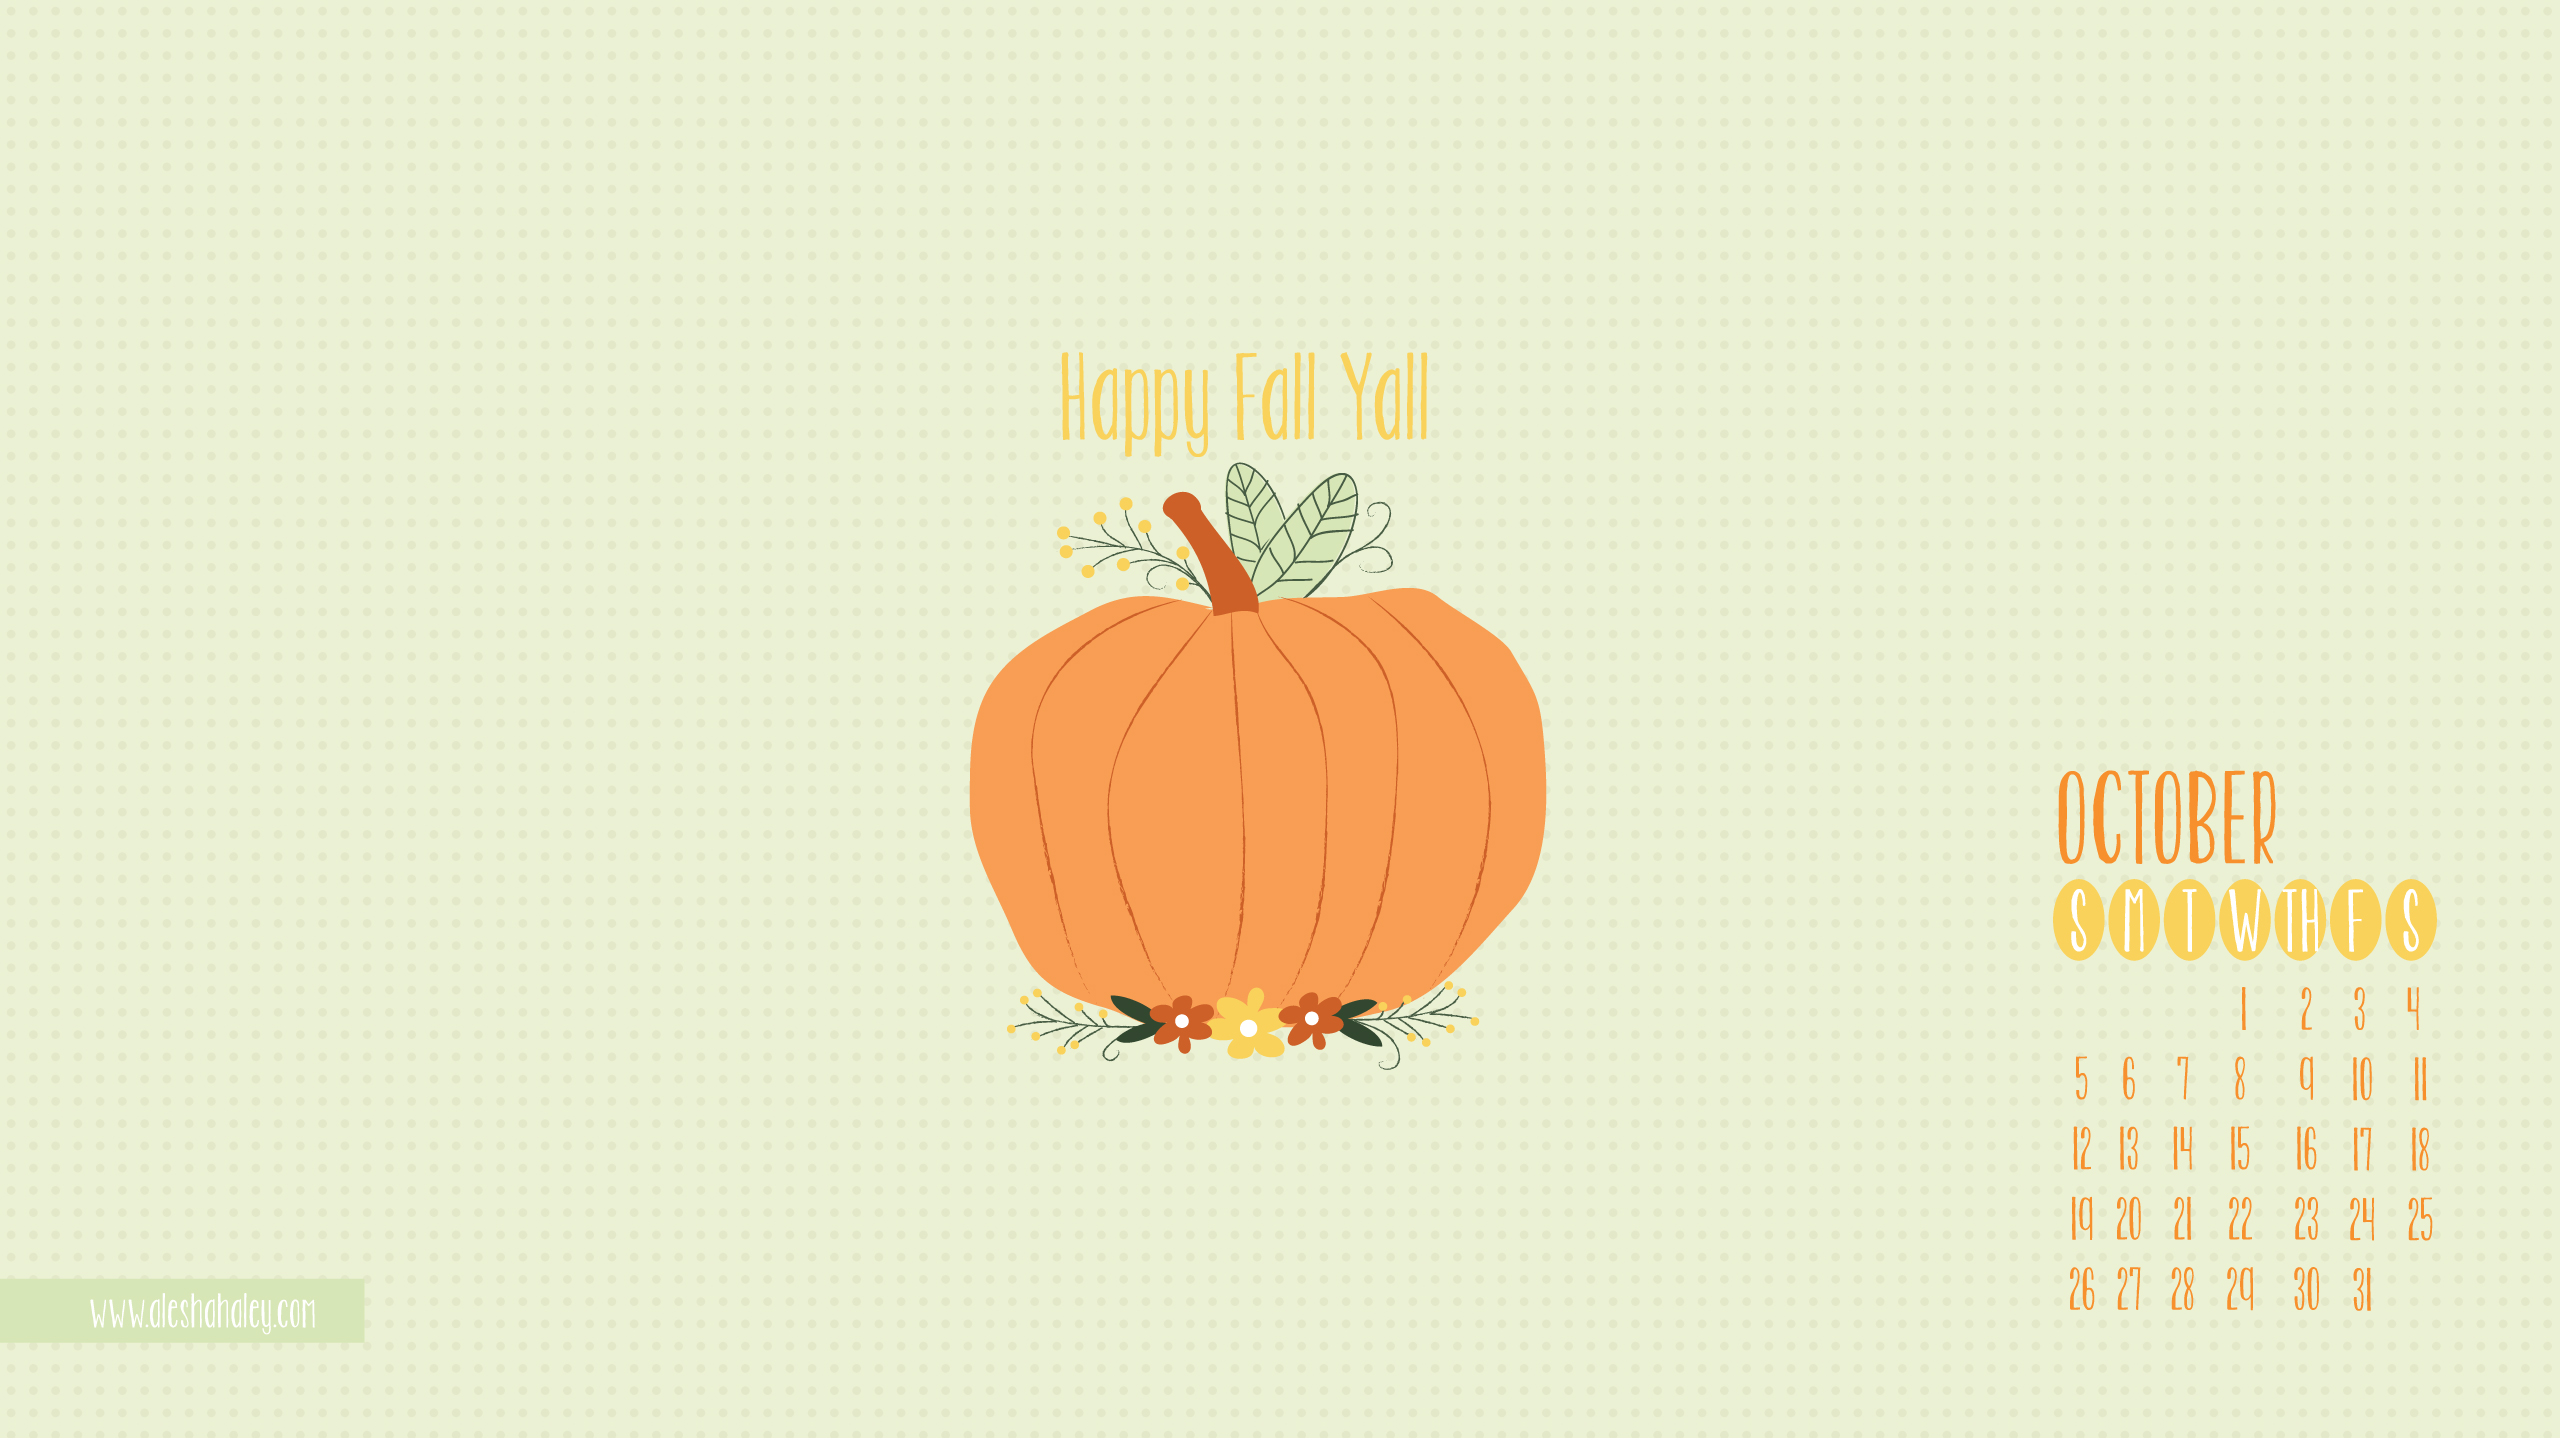 OCTOBER  WELCOMING AUTUMN WITH A FREE DESKTOP WALLPAPER  ANGIE  SPURGEON ILLUSTRATION AND DESIGN